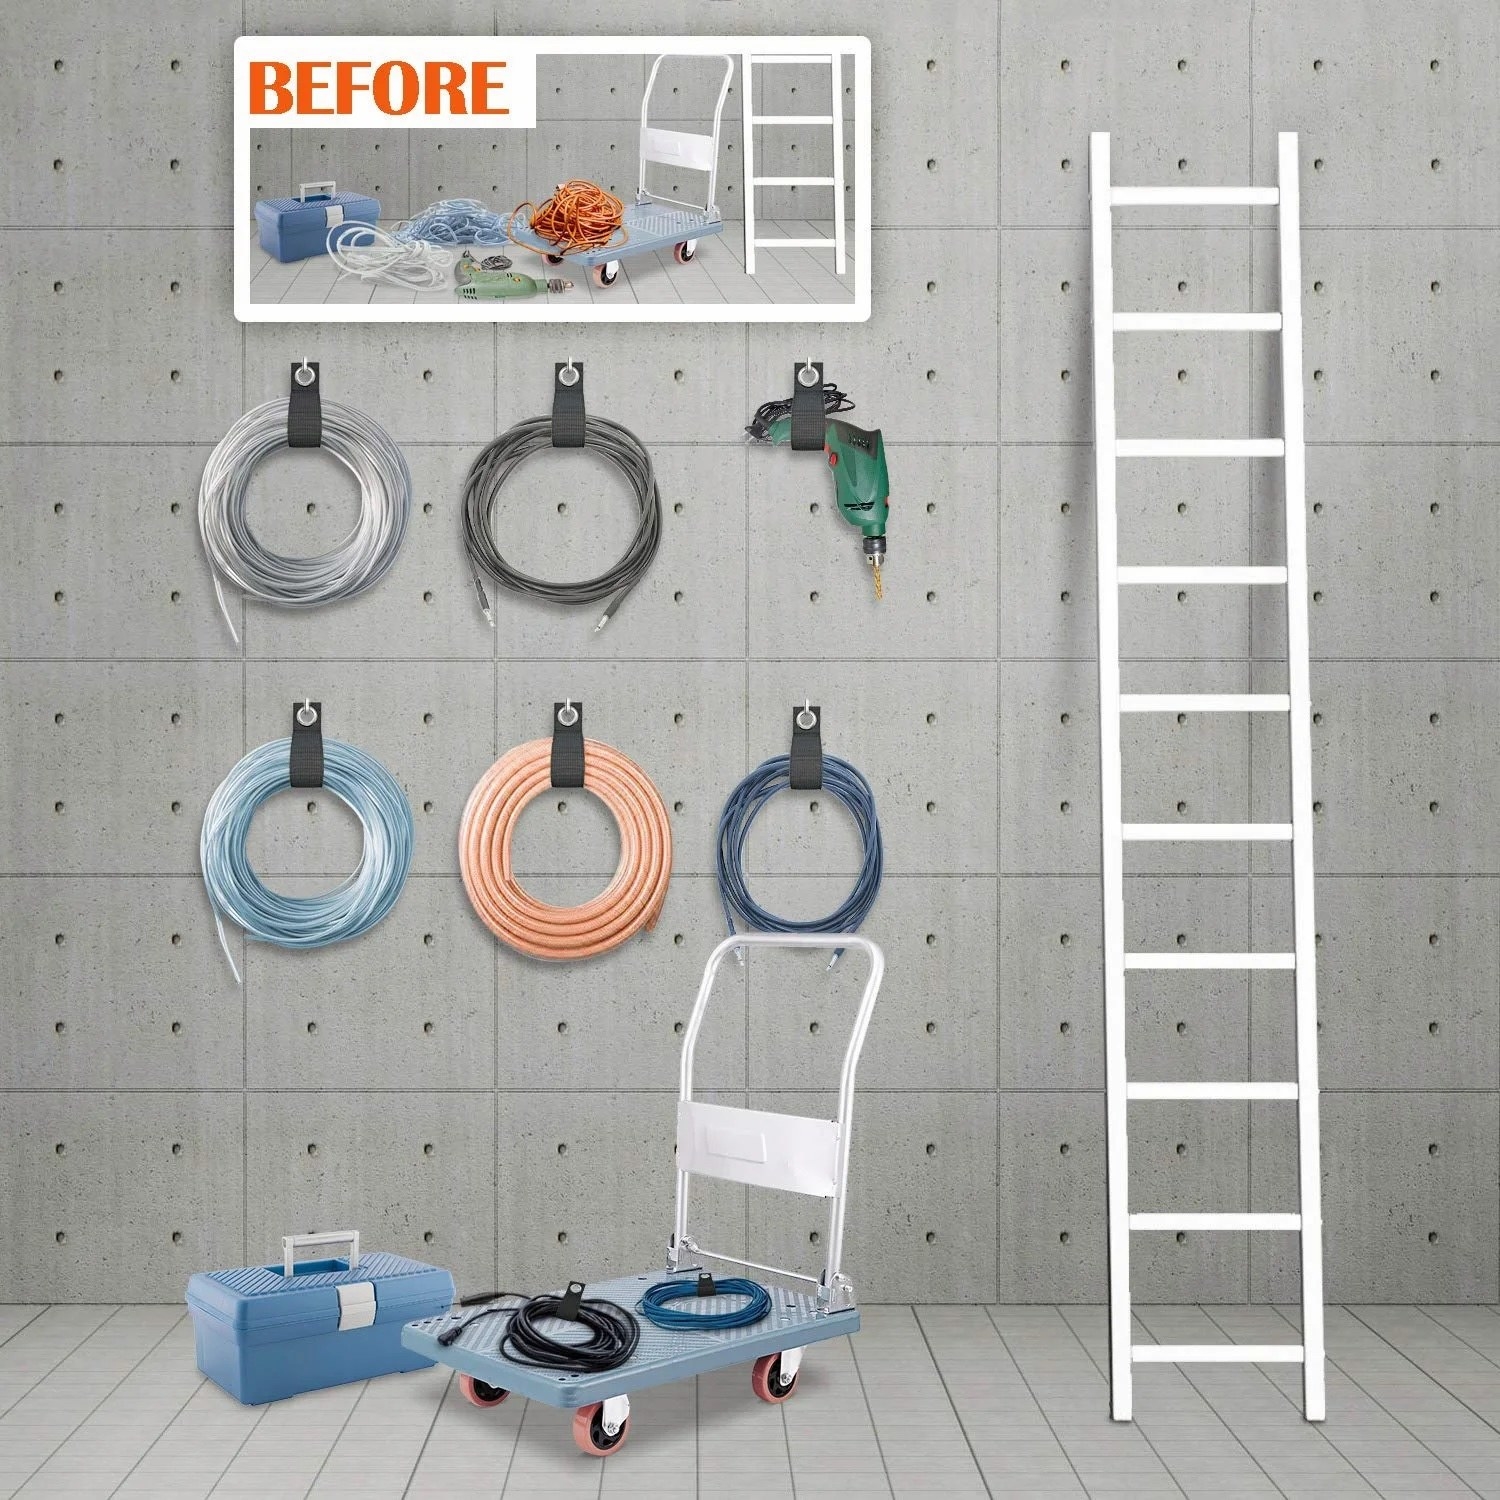 A set of extension cord organizers